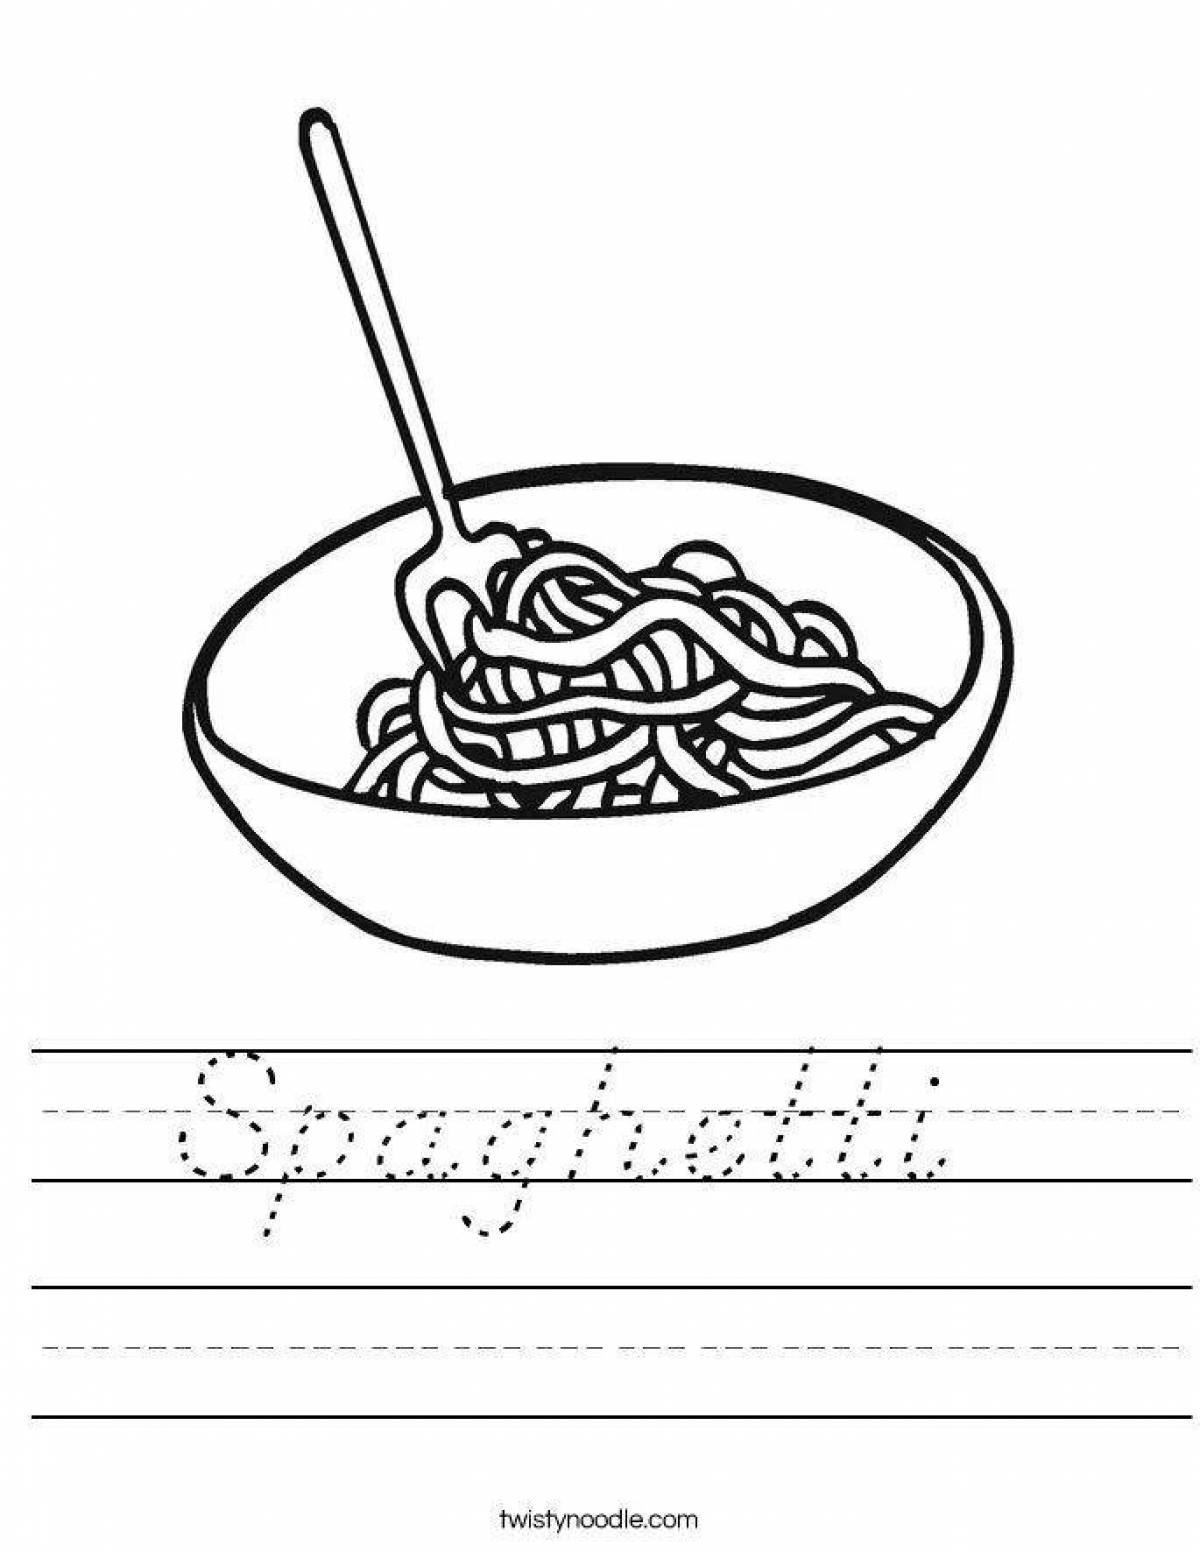 Playful pasta coloring page